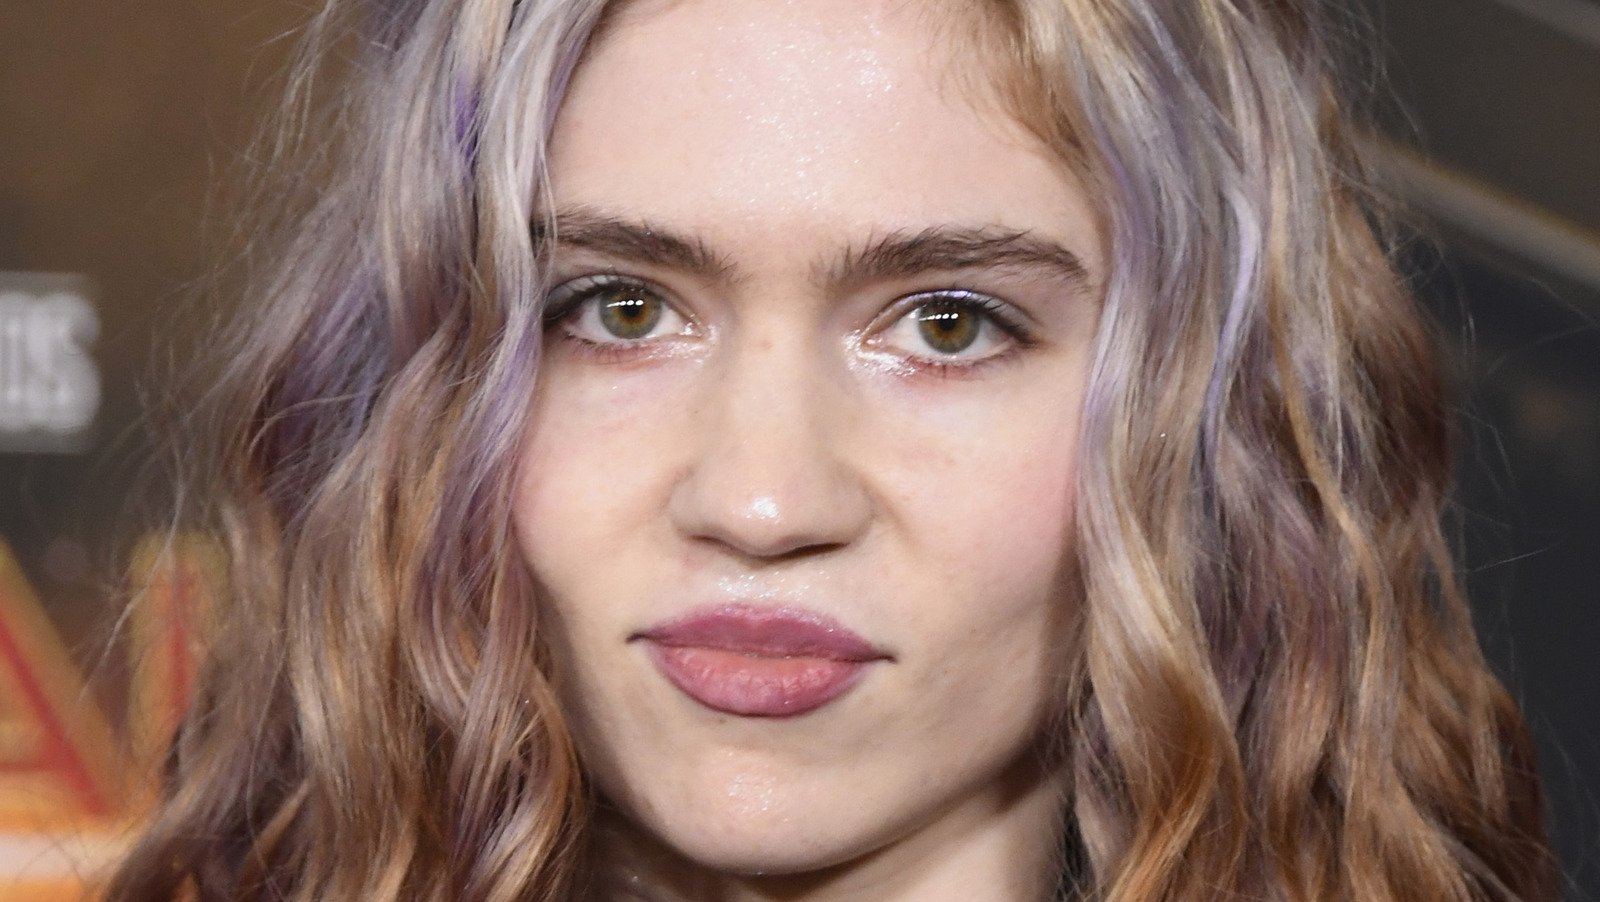 Here's What Grimes Looks Like Going Makeup-Free - The List